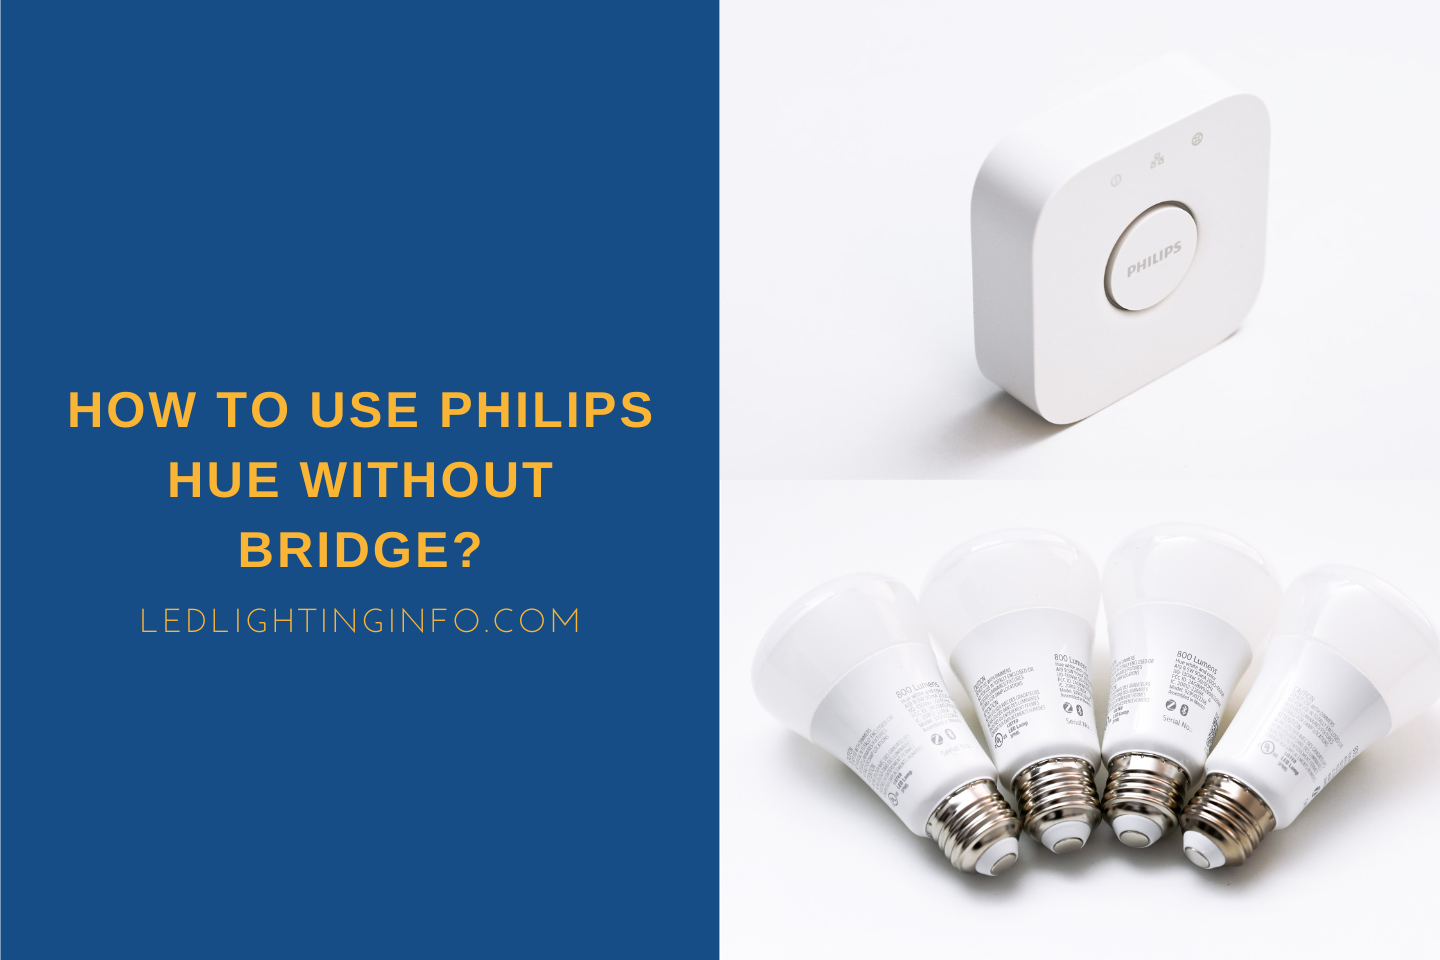 How To Use Philips Hue Without Bridge?